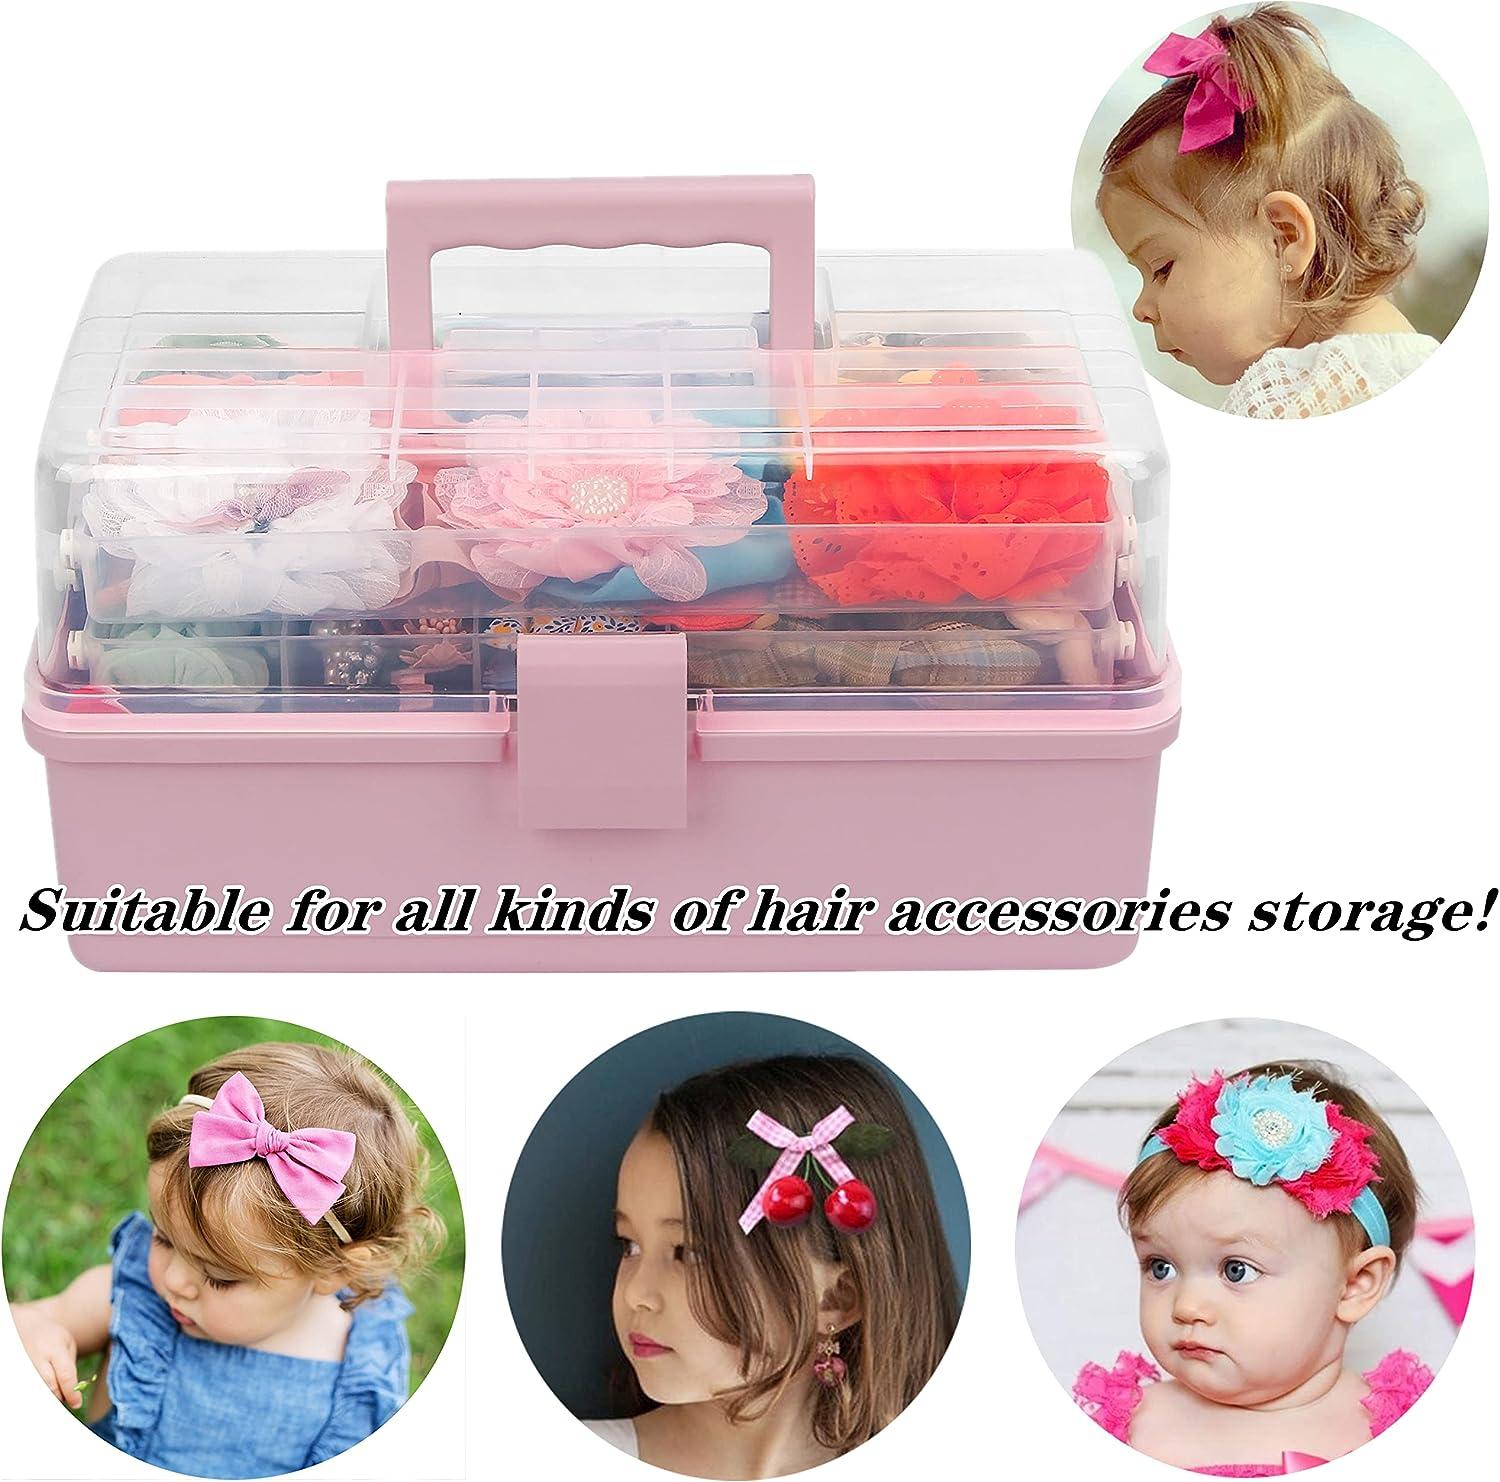  BABEYER Baby Girls Hair Accessory Organizer, Baby Headband  Organizer for Hair Pins, Ties, Bows, Clips, Barrette, Storage Bag with  Multi-Compartment for Little Girls-Pink : Baby